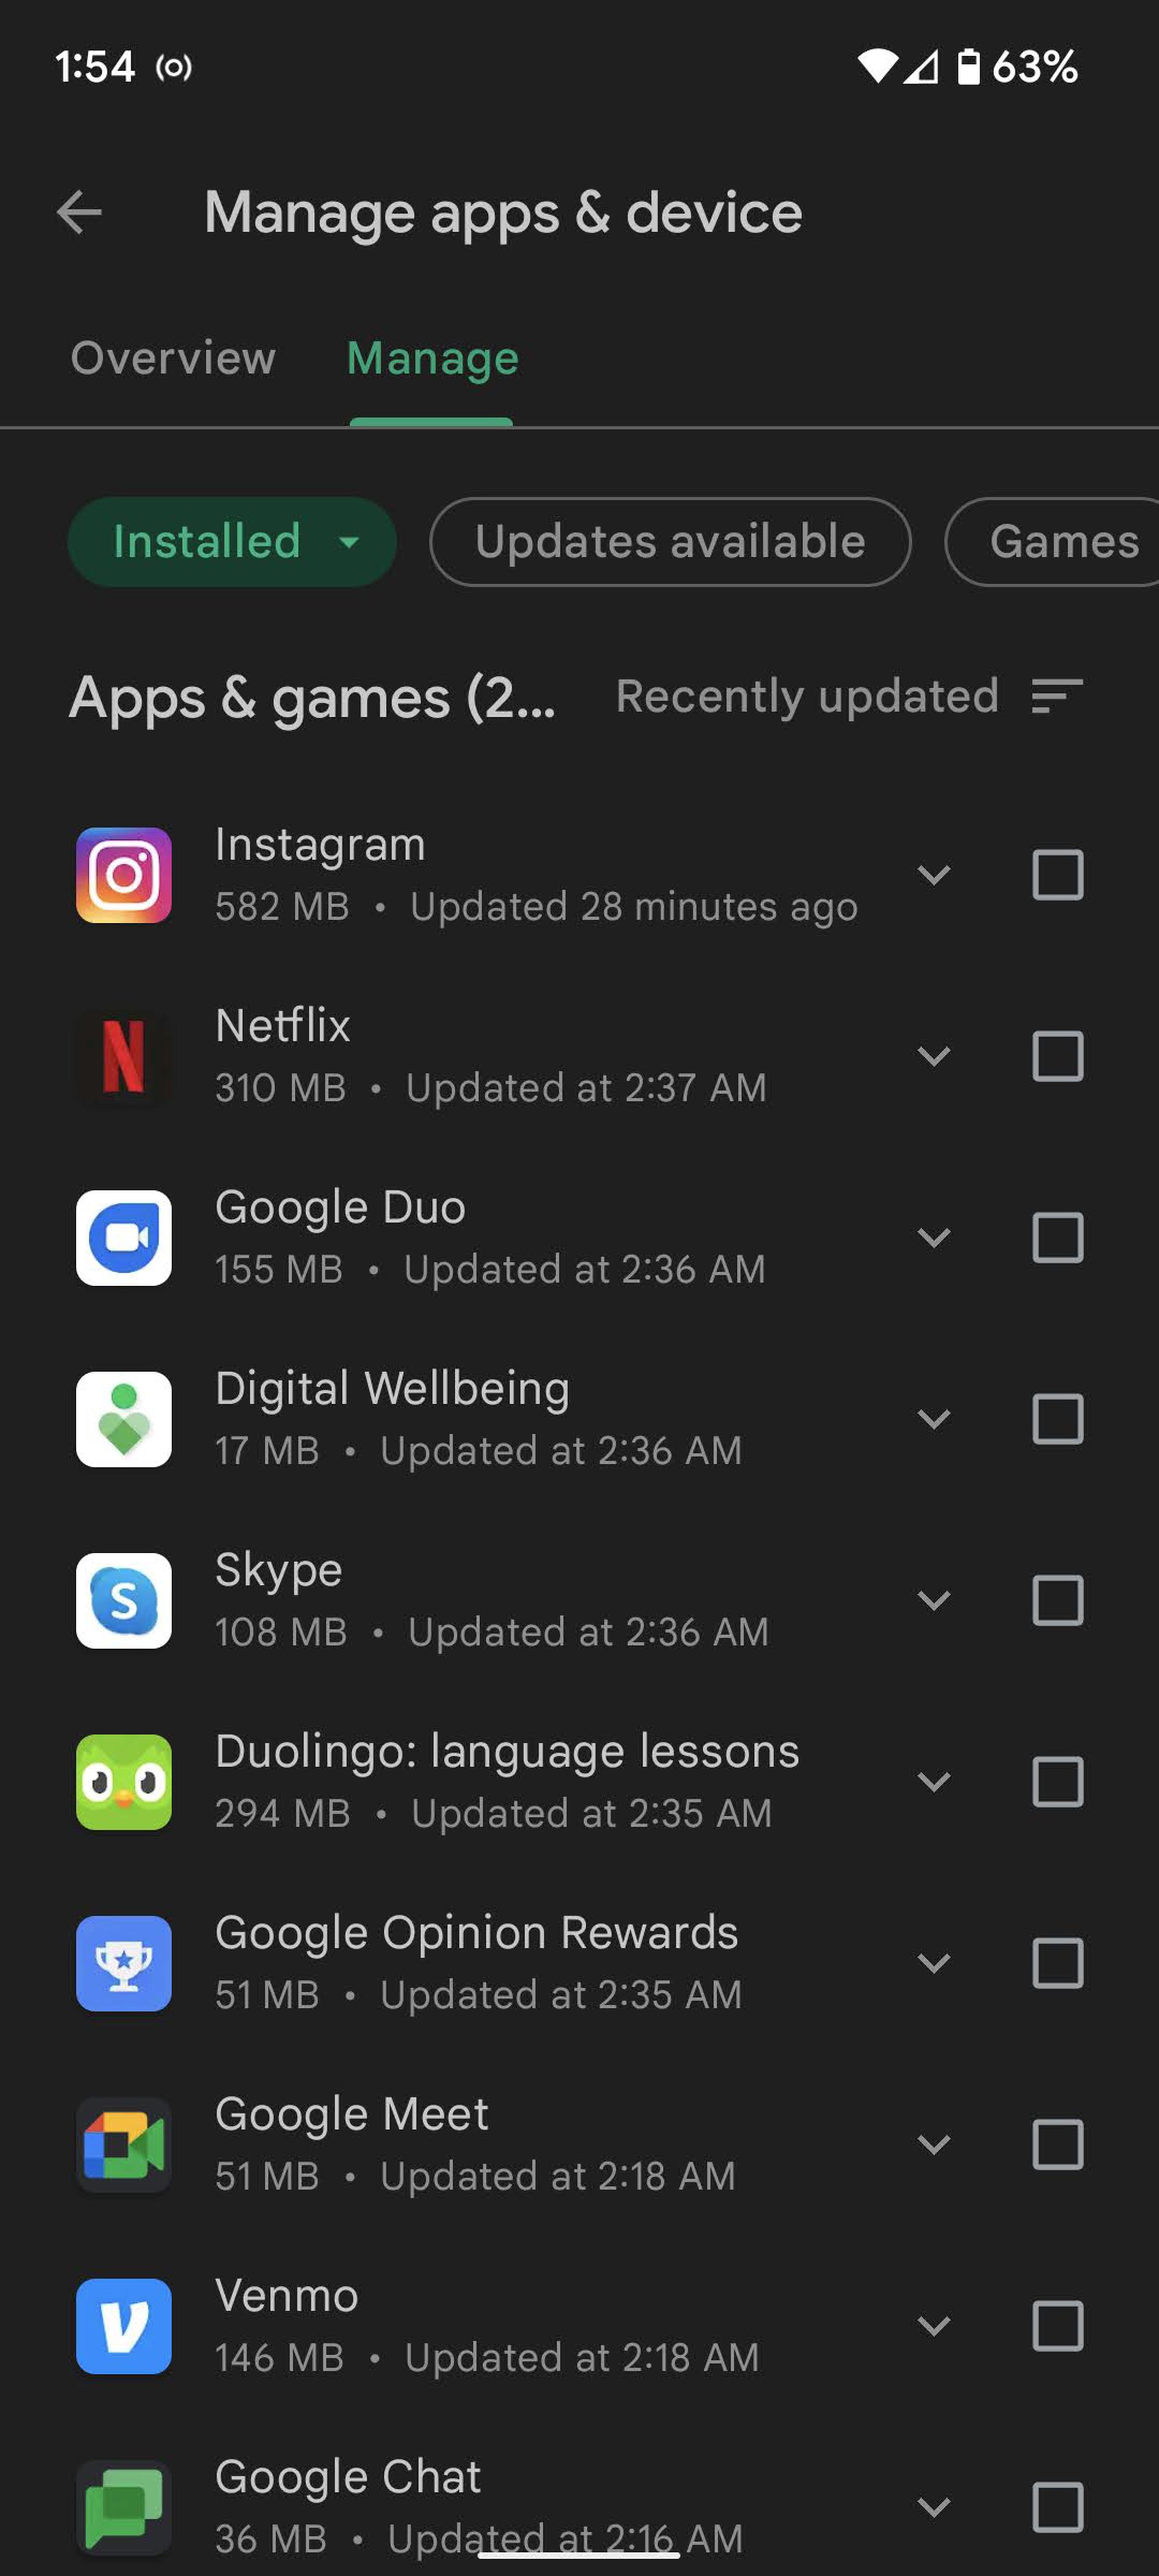 In “Manage apps &amp; device” you can see all your apps.